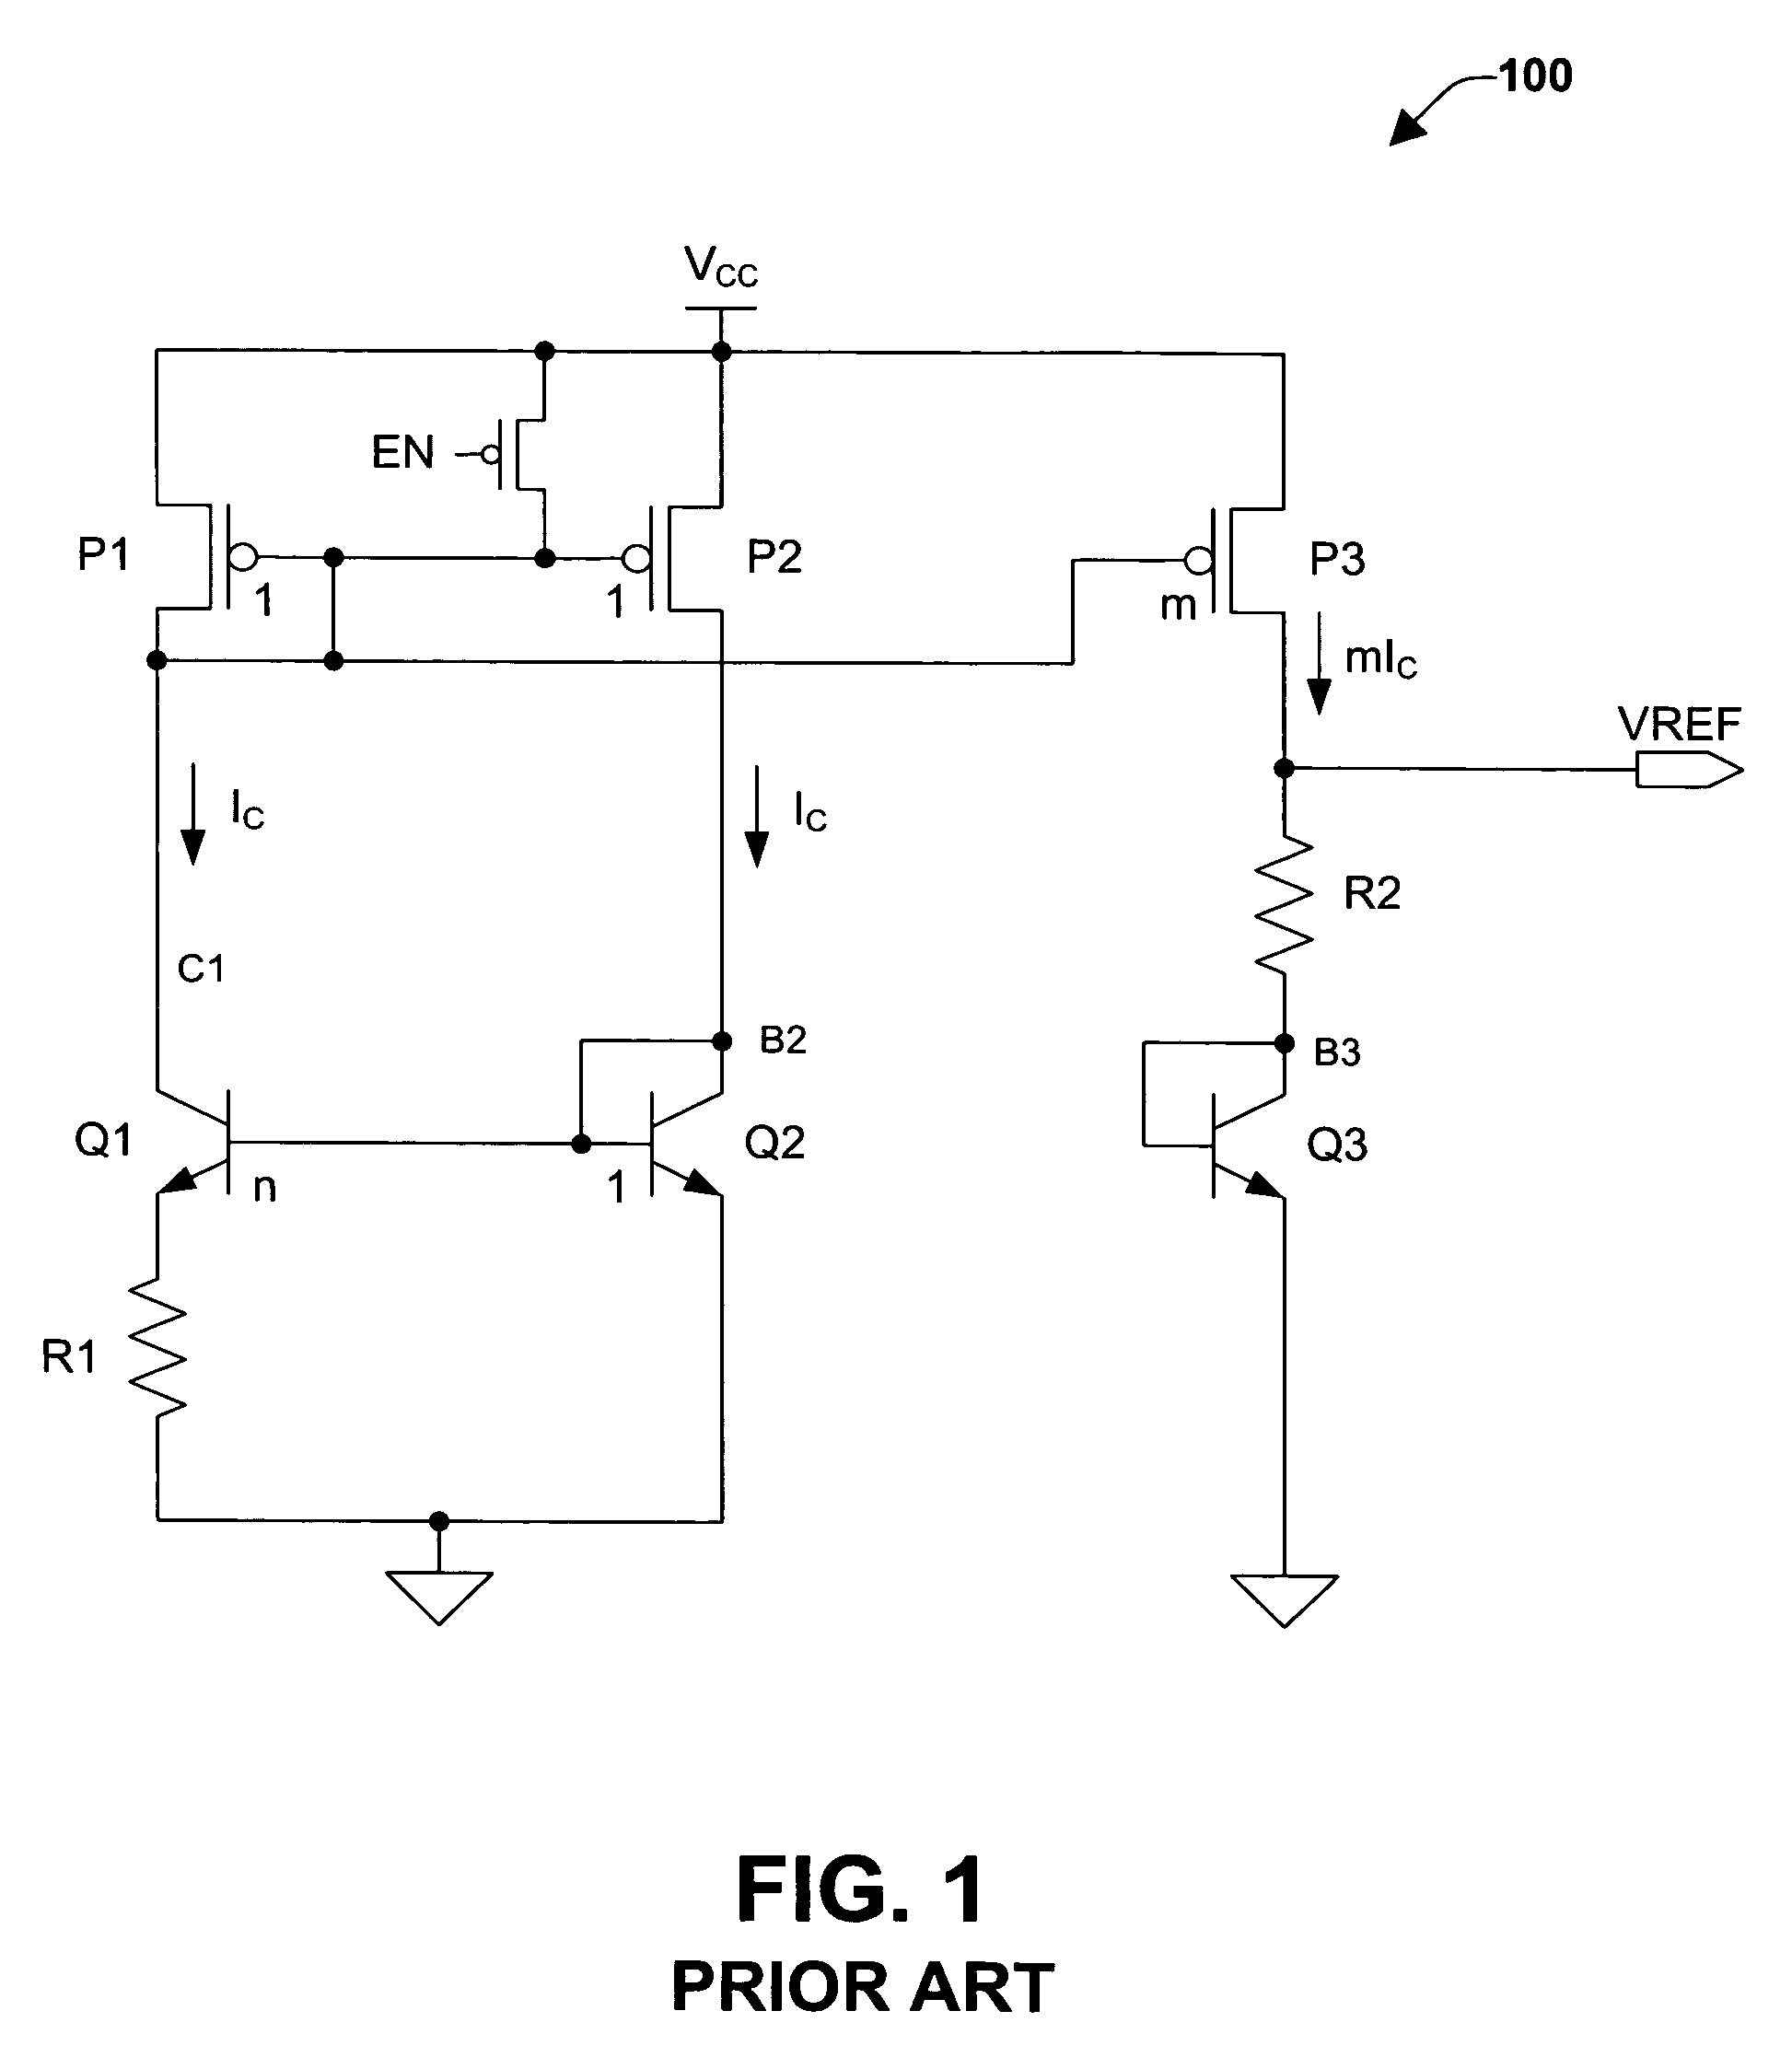 Method to provide a higher reference voltage at a lower power supply in flash memory devices